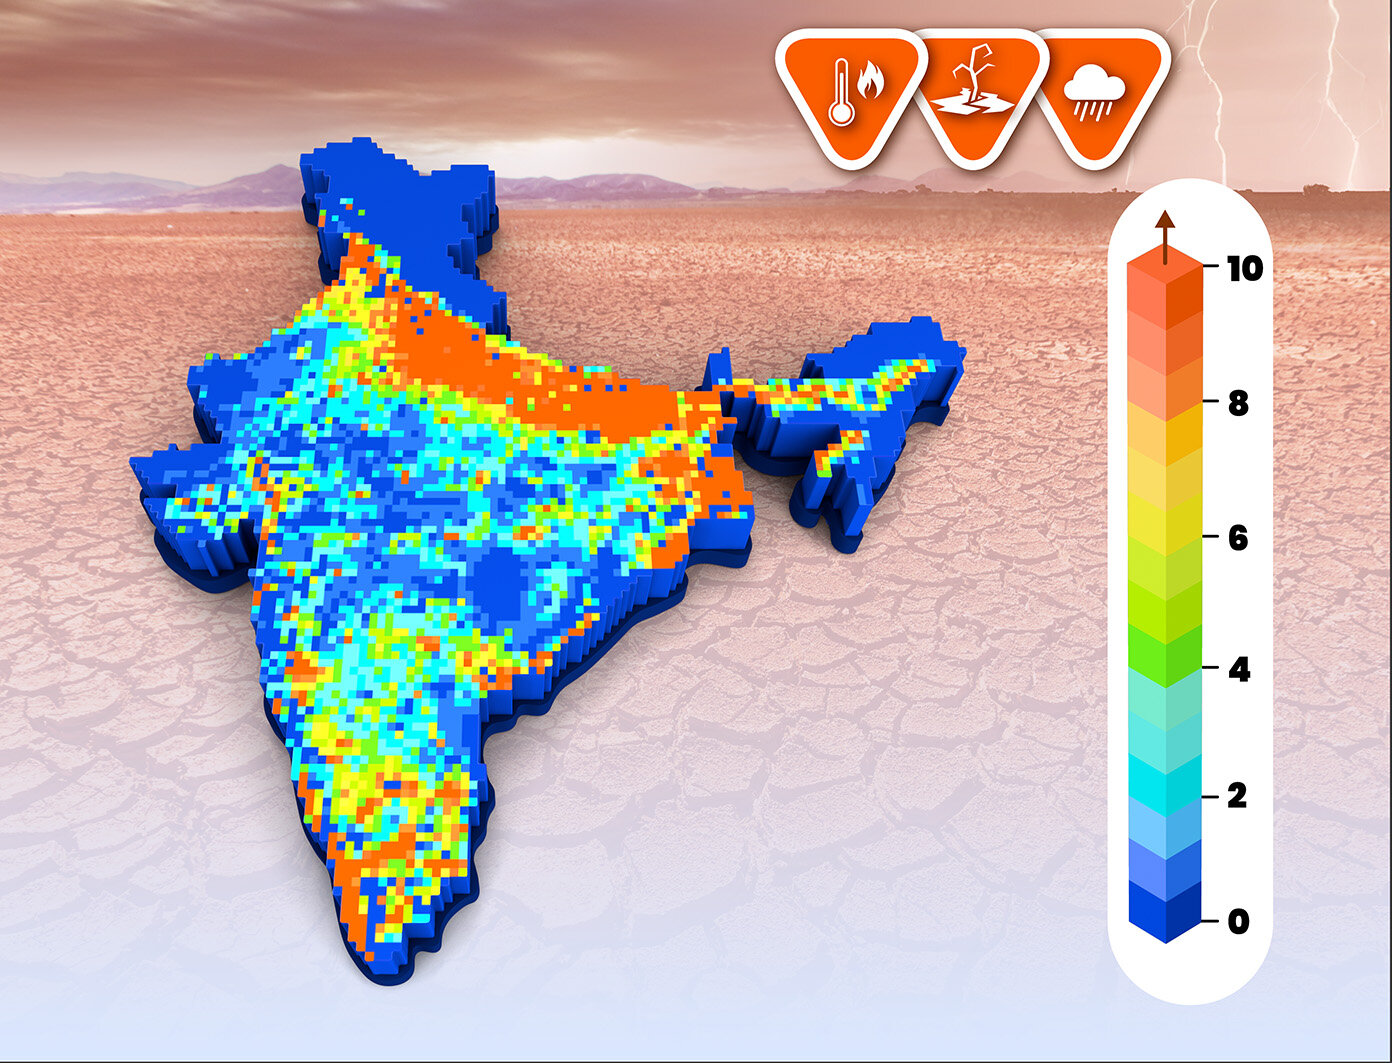 Research suggests that part of India will become a climate hotspot